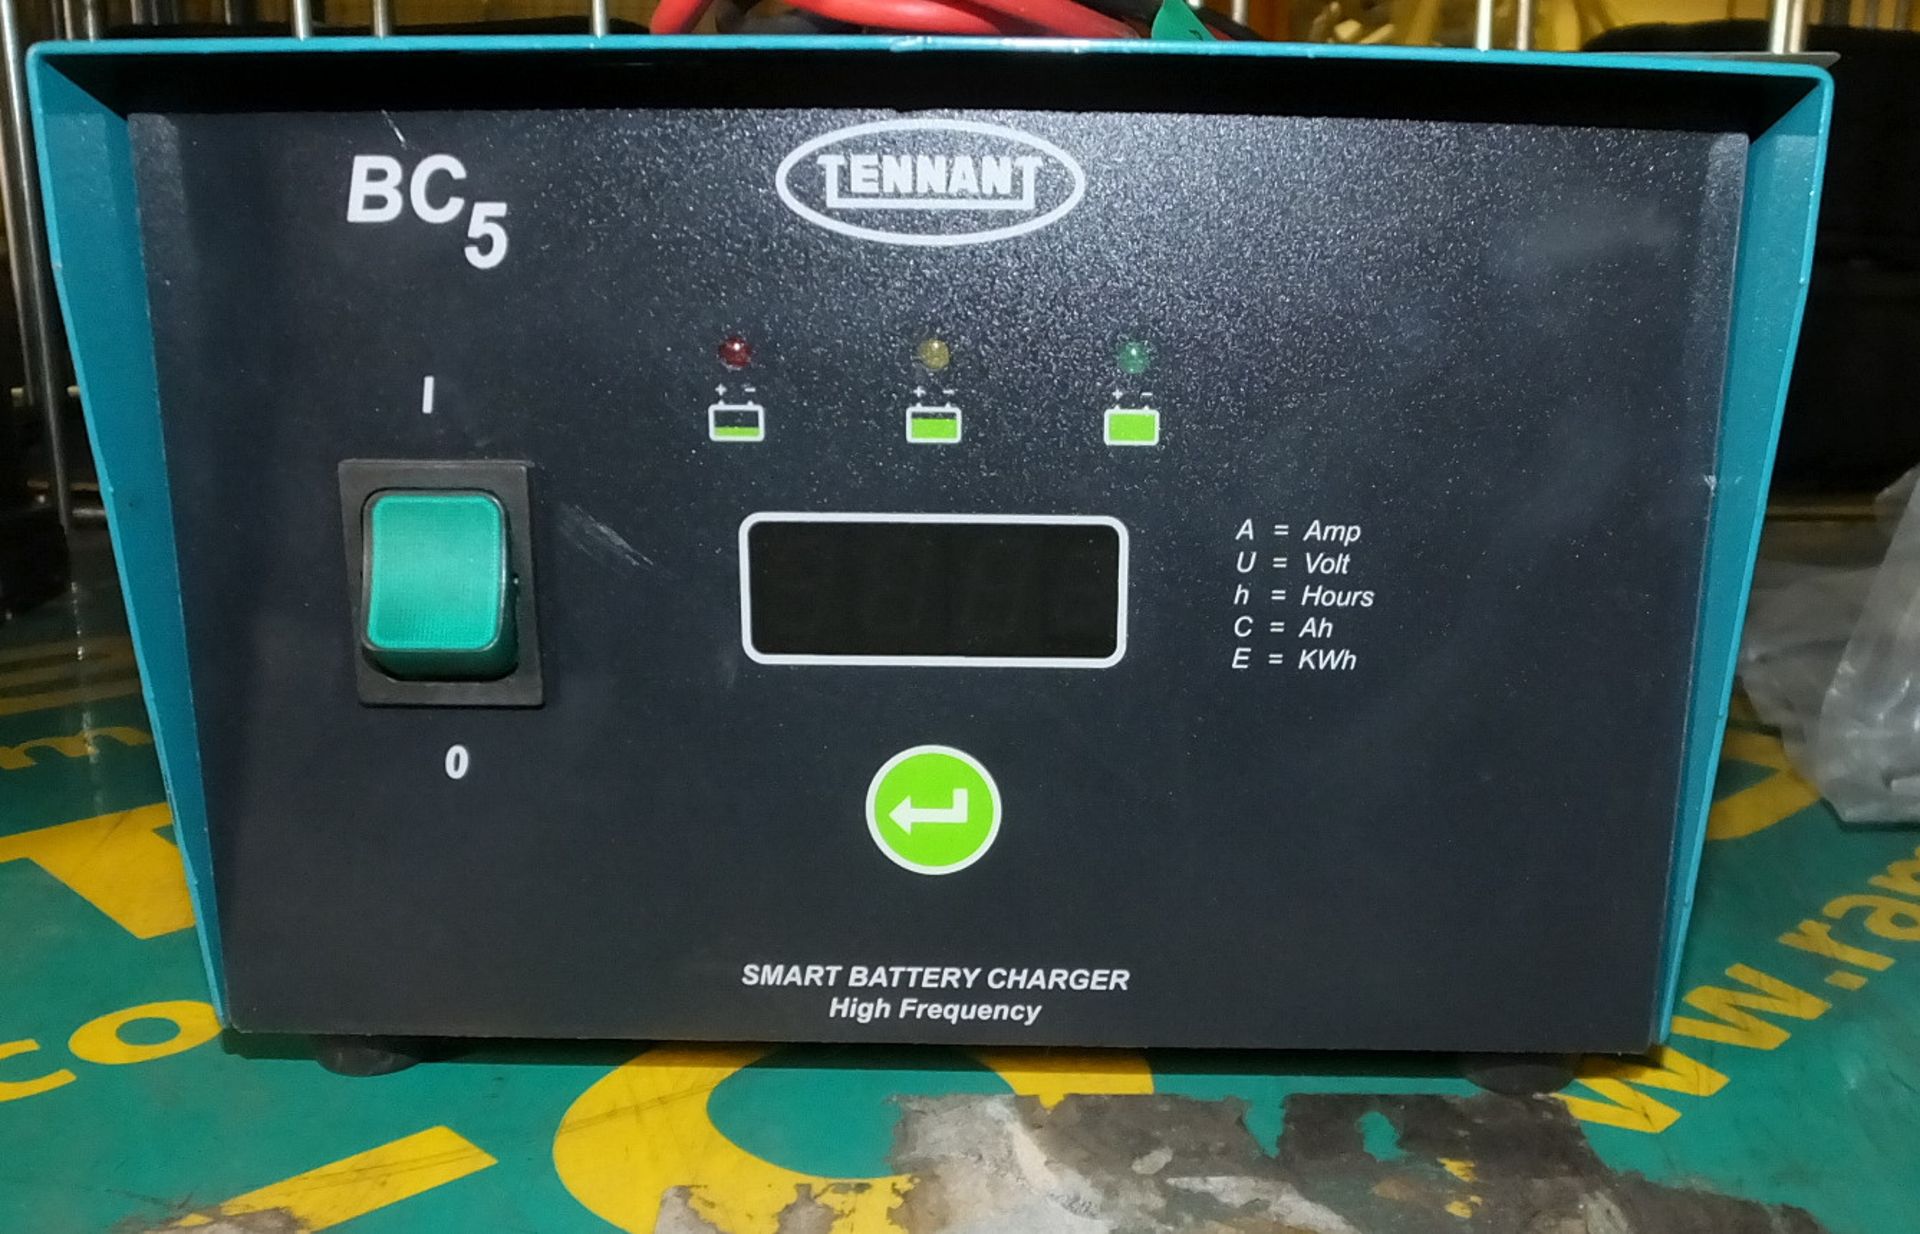 Tennant BC5 WET-1041700 battery charger - Image 2 of 4